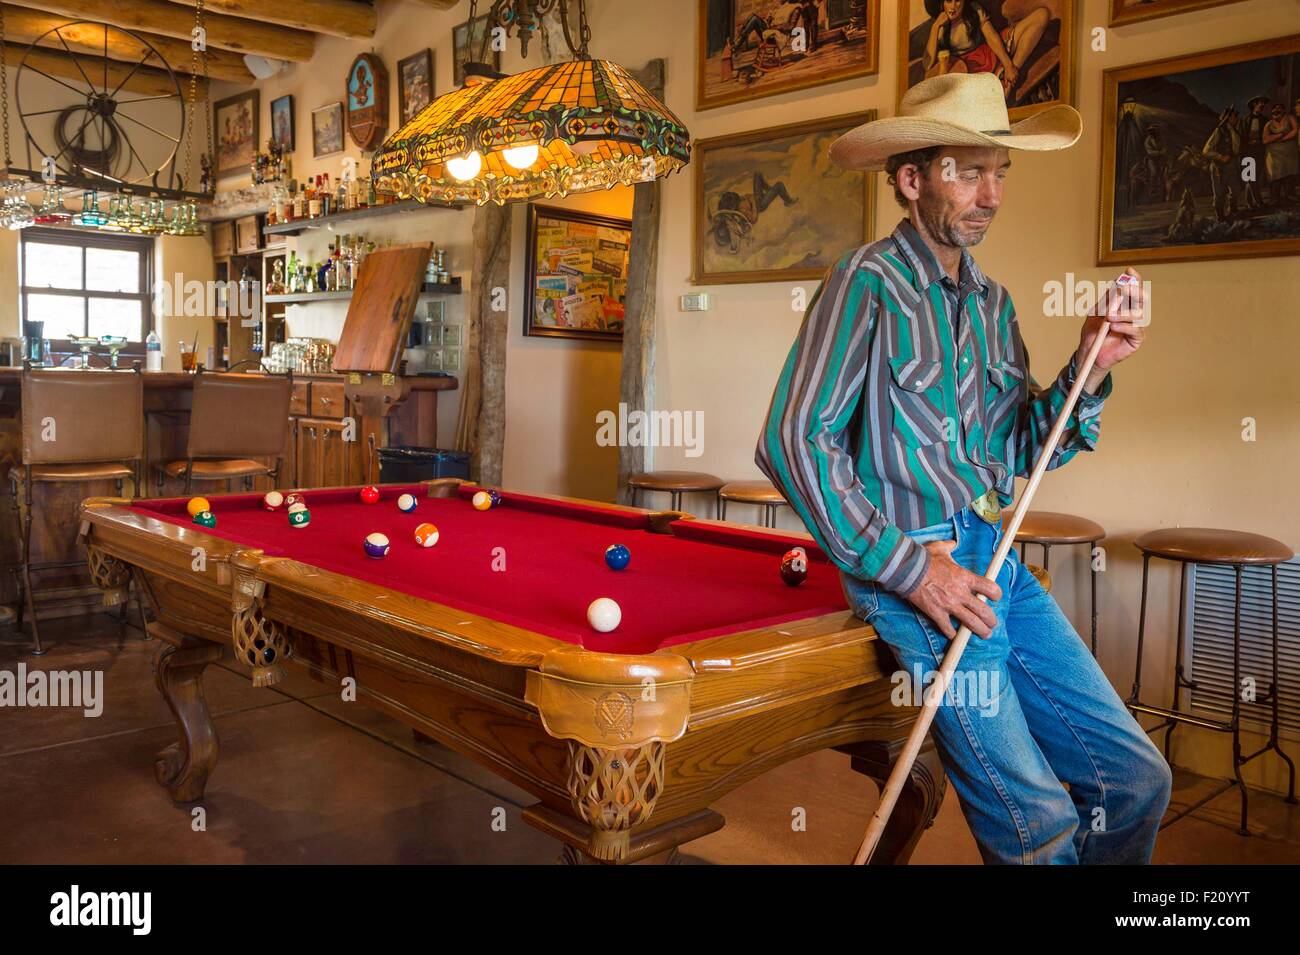 United States, Arizona, Tucson, Tanque Verde Ranch, snooker game Stock Photo